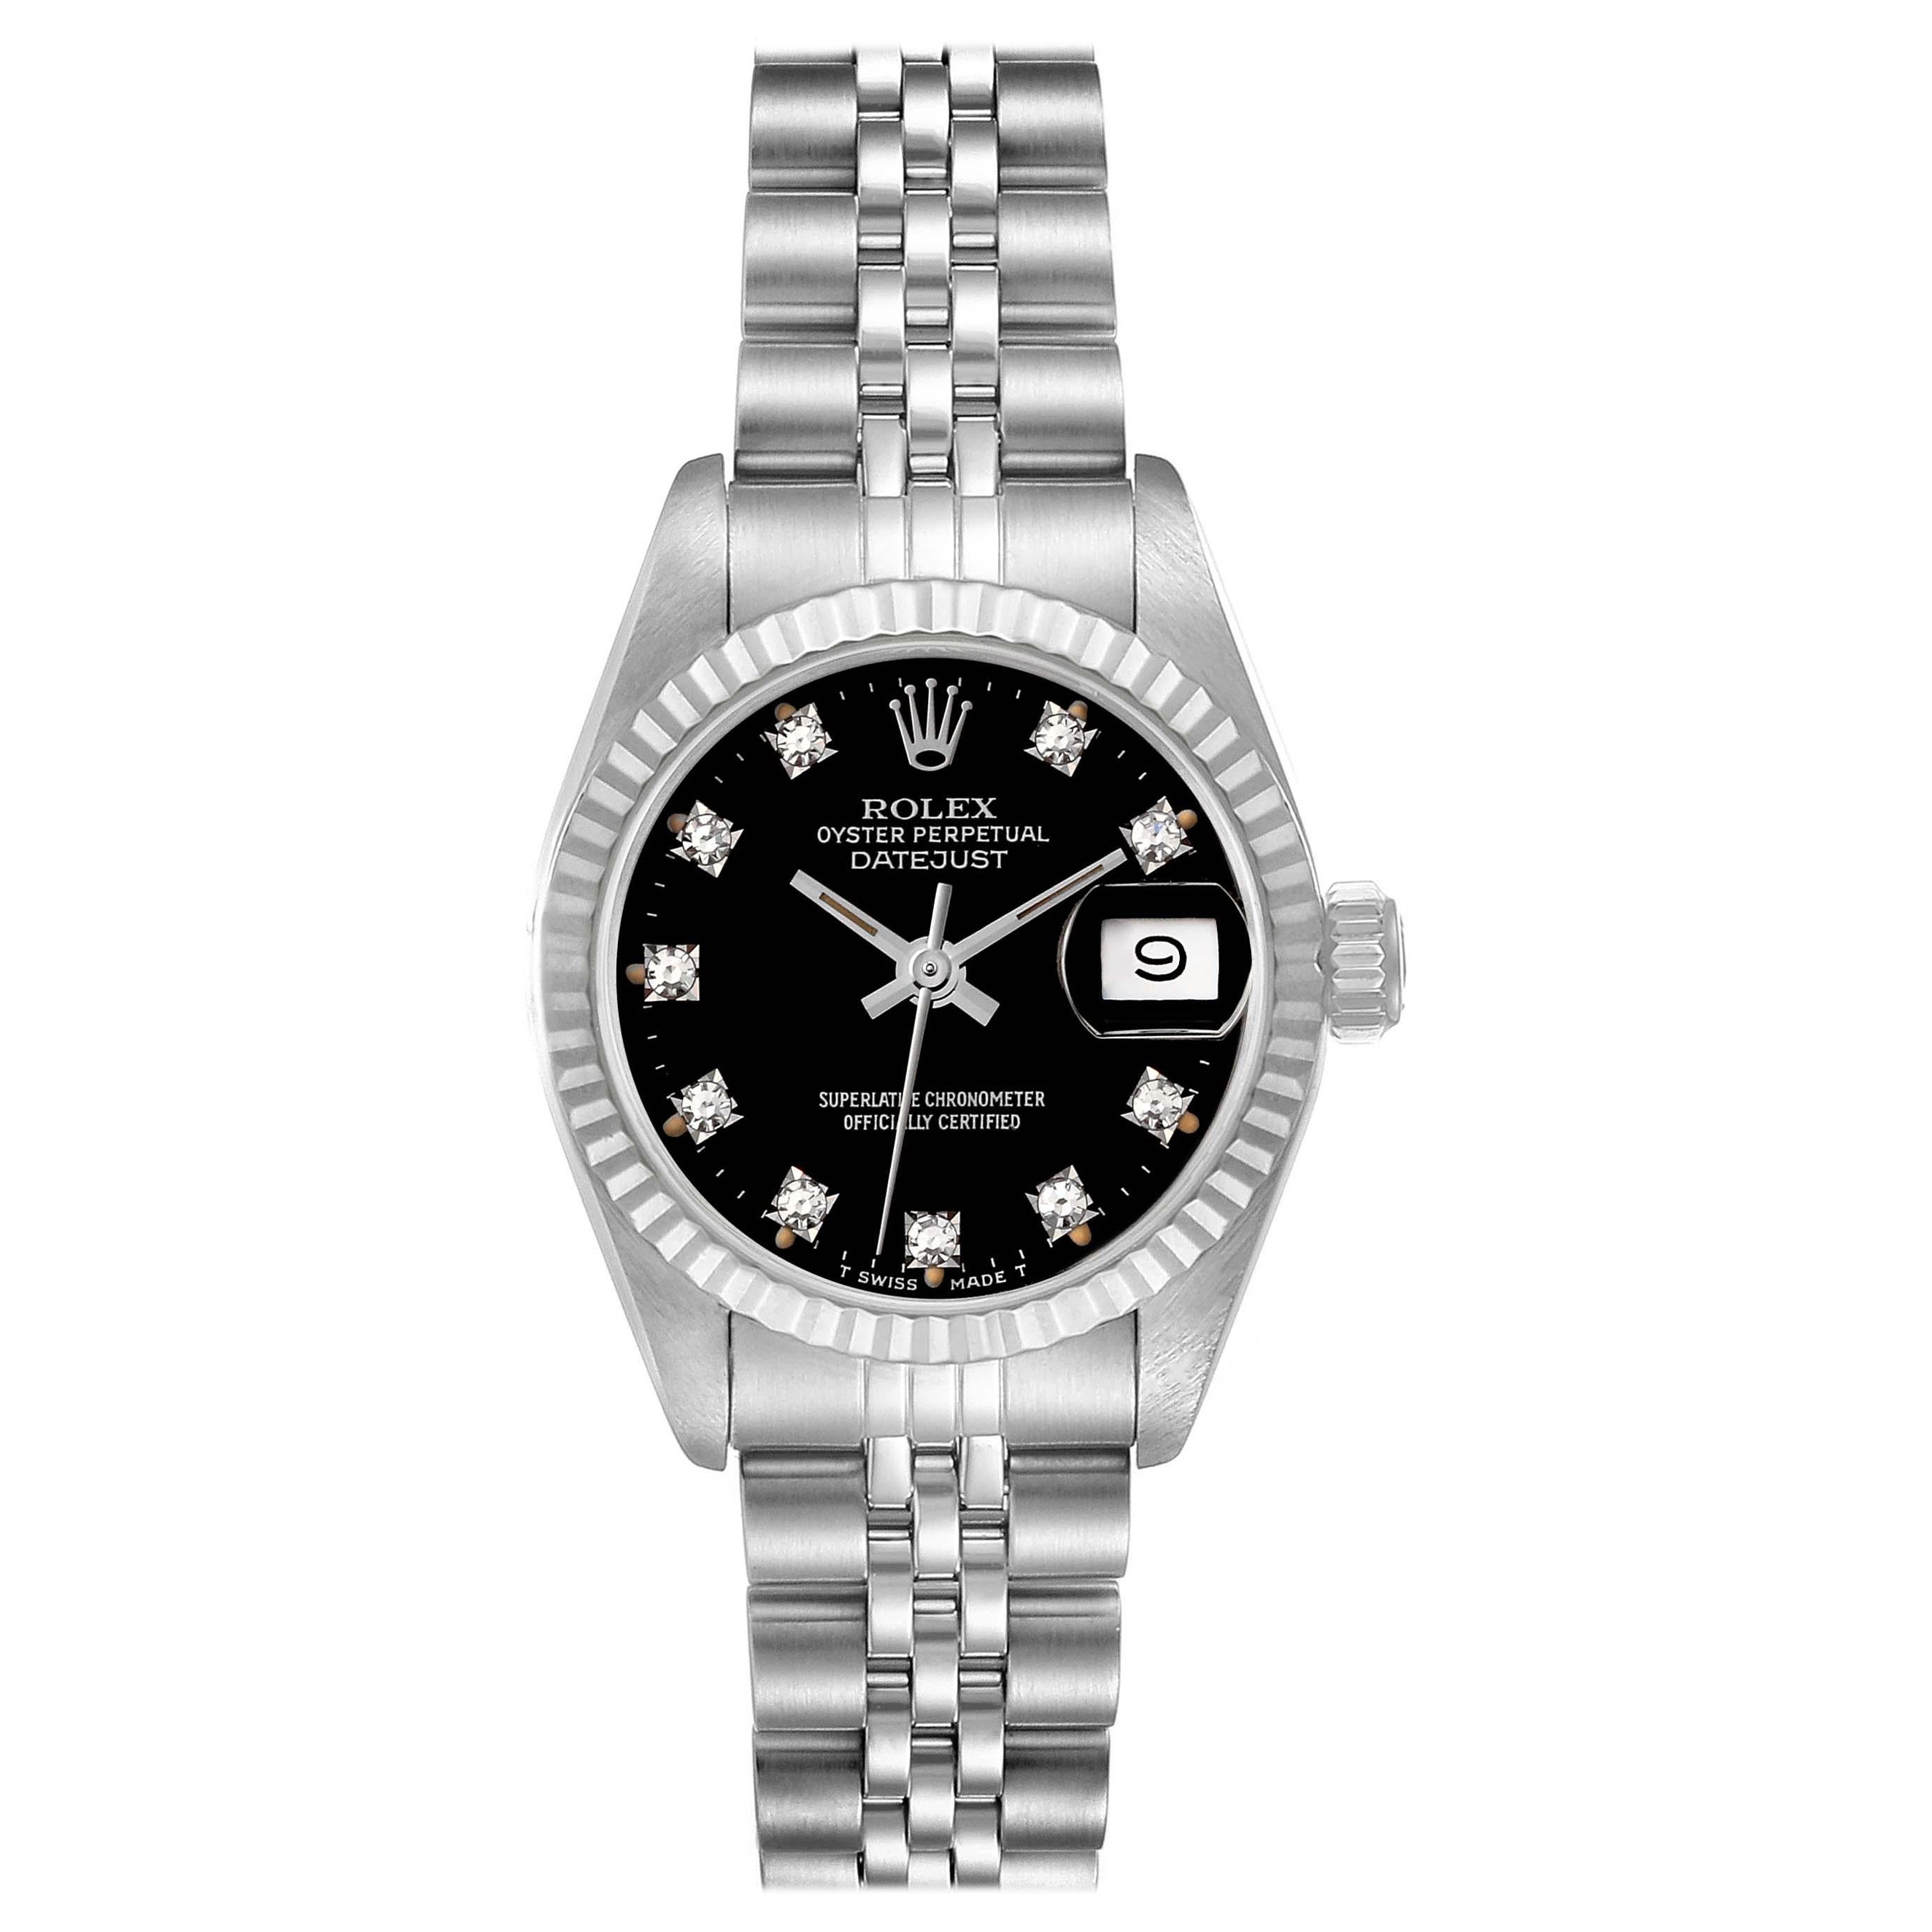 Rolex Datejust Steel White Gold Black Diamond Dial Ladies Watch 69174 Box Papers